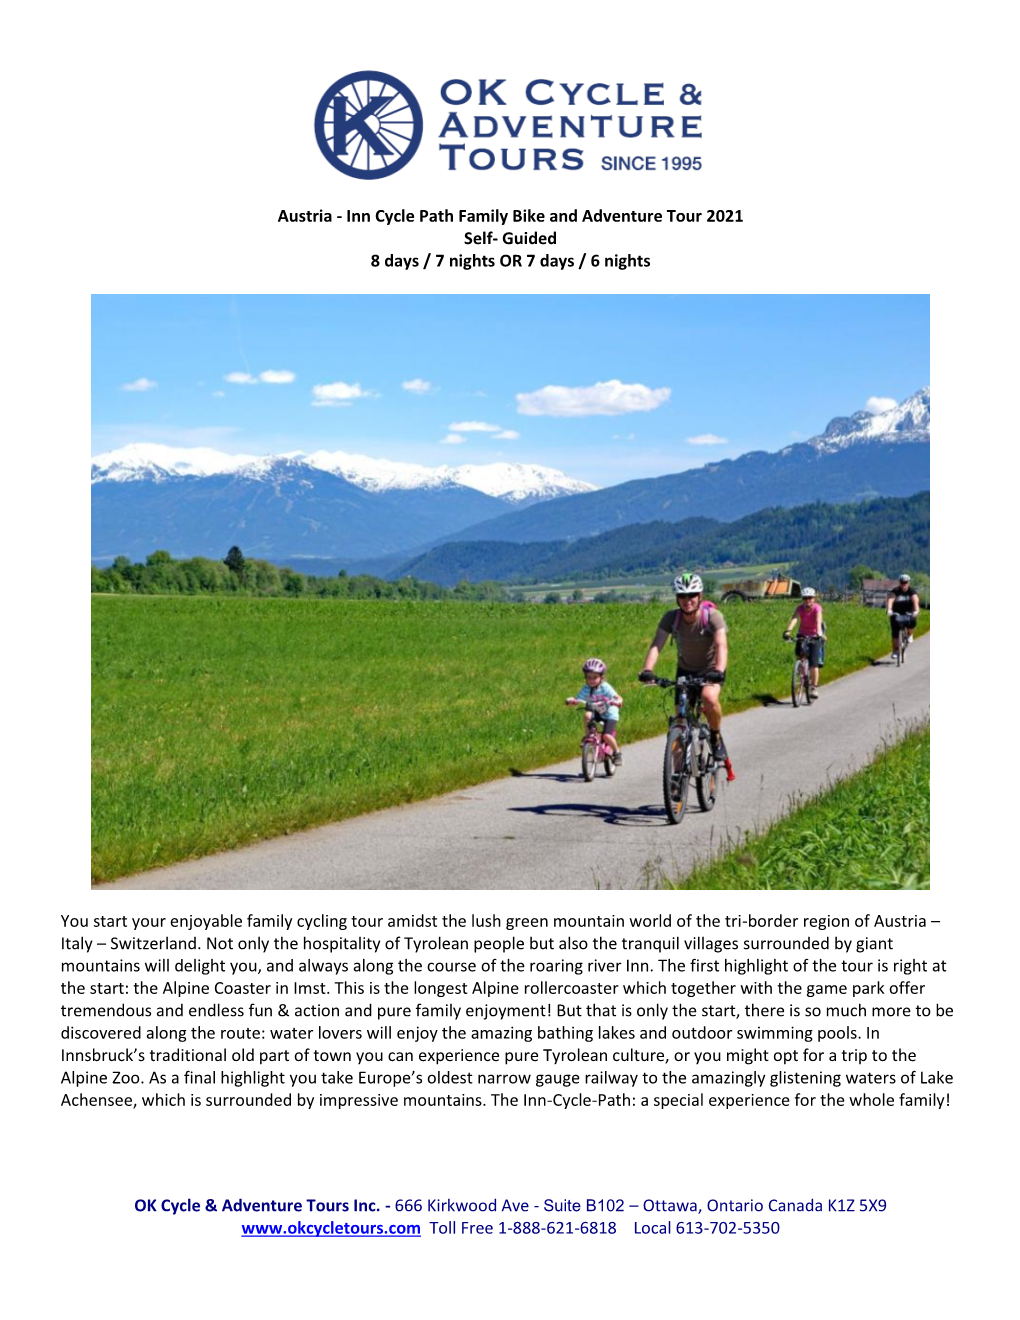 Austria - Inn Cycle Path Family Bike and Adventure Tour 2021 Self- Guided 8 Days / 7 Nights OR 7 Days / 6 Nights